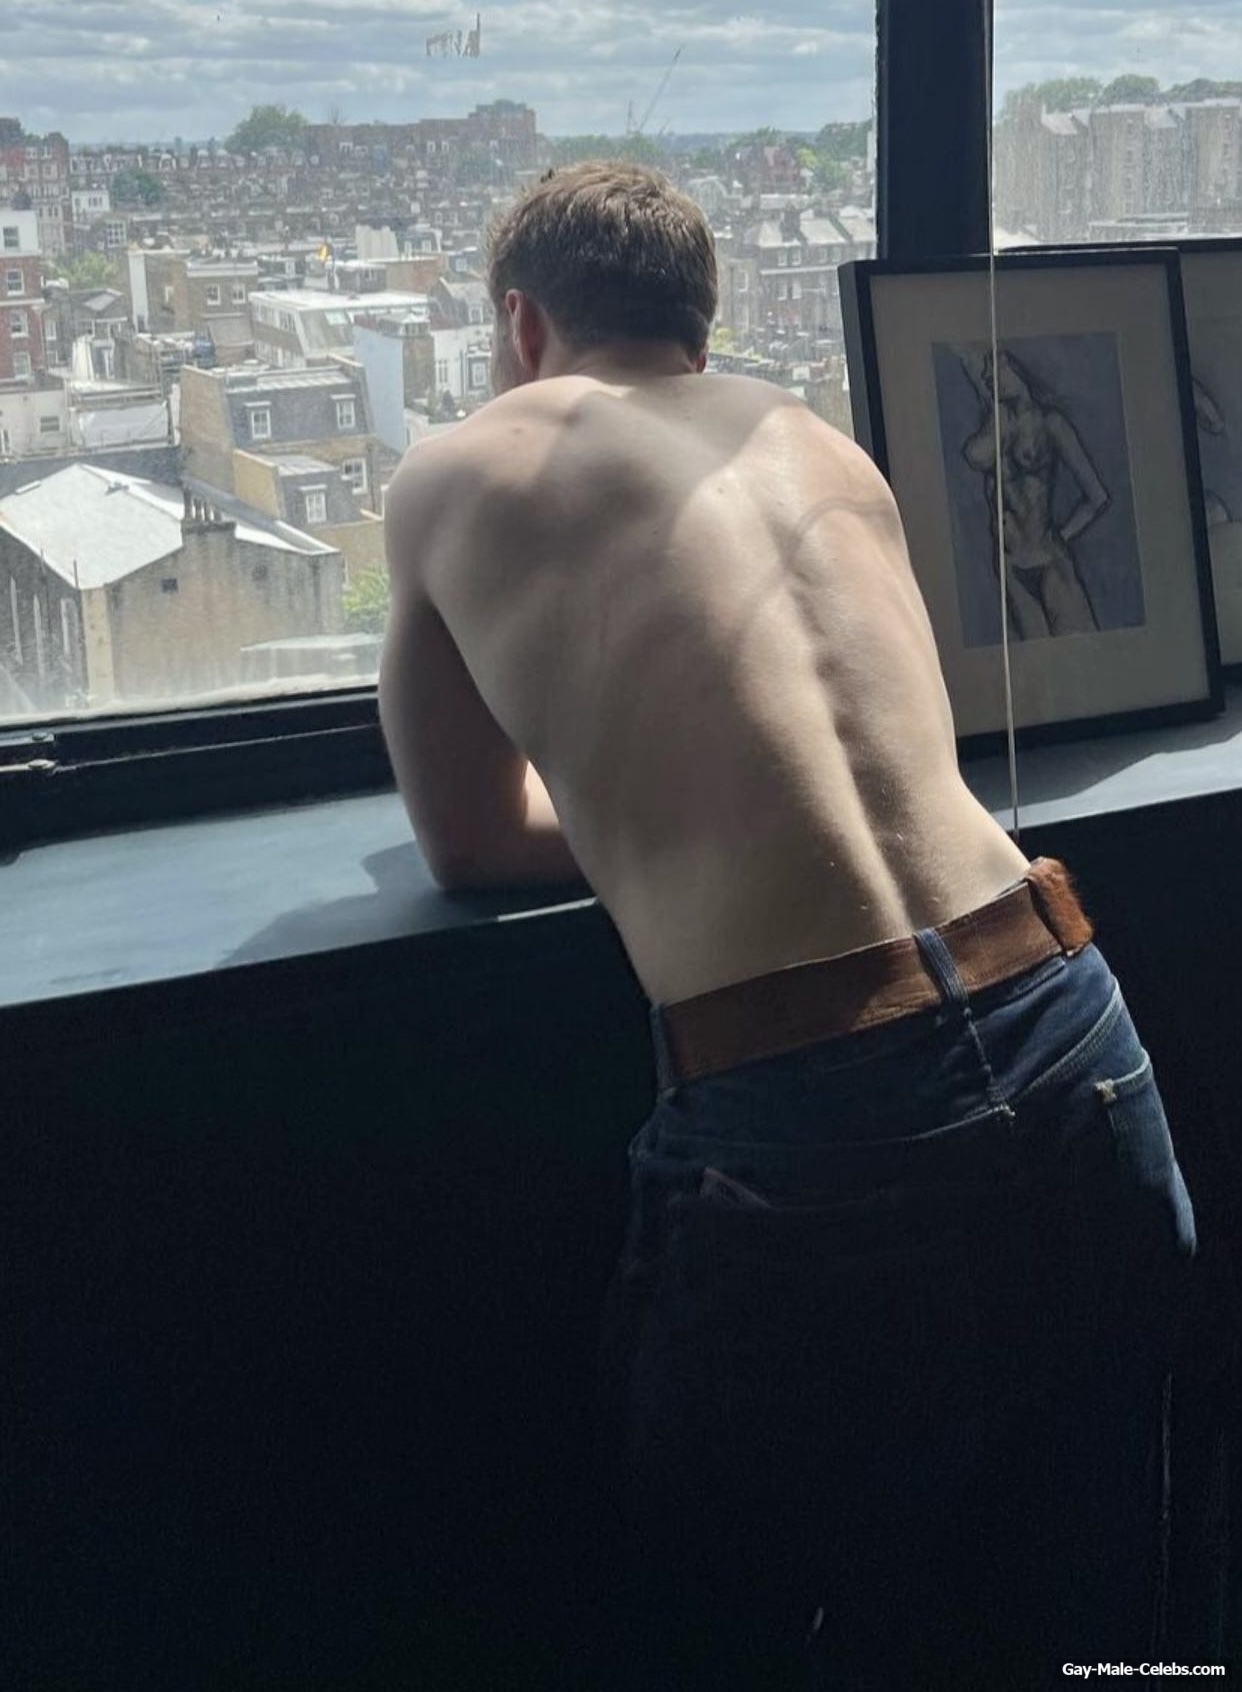 Madonna’s Son Rocco Ritchie Shirtless And Sexy Photos